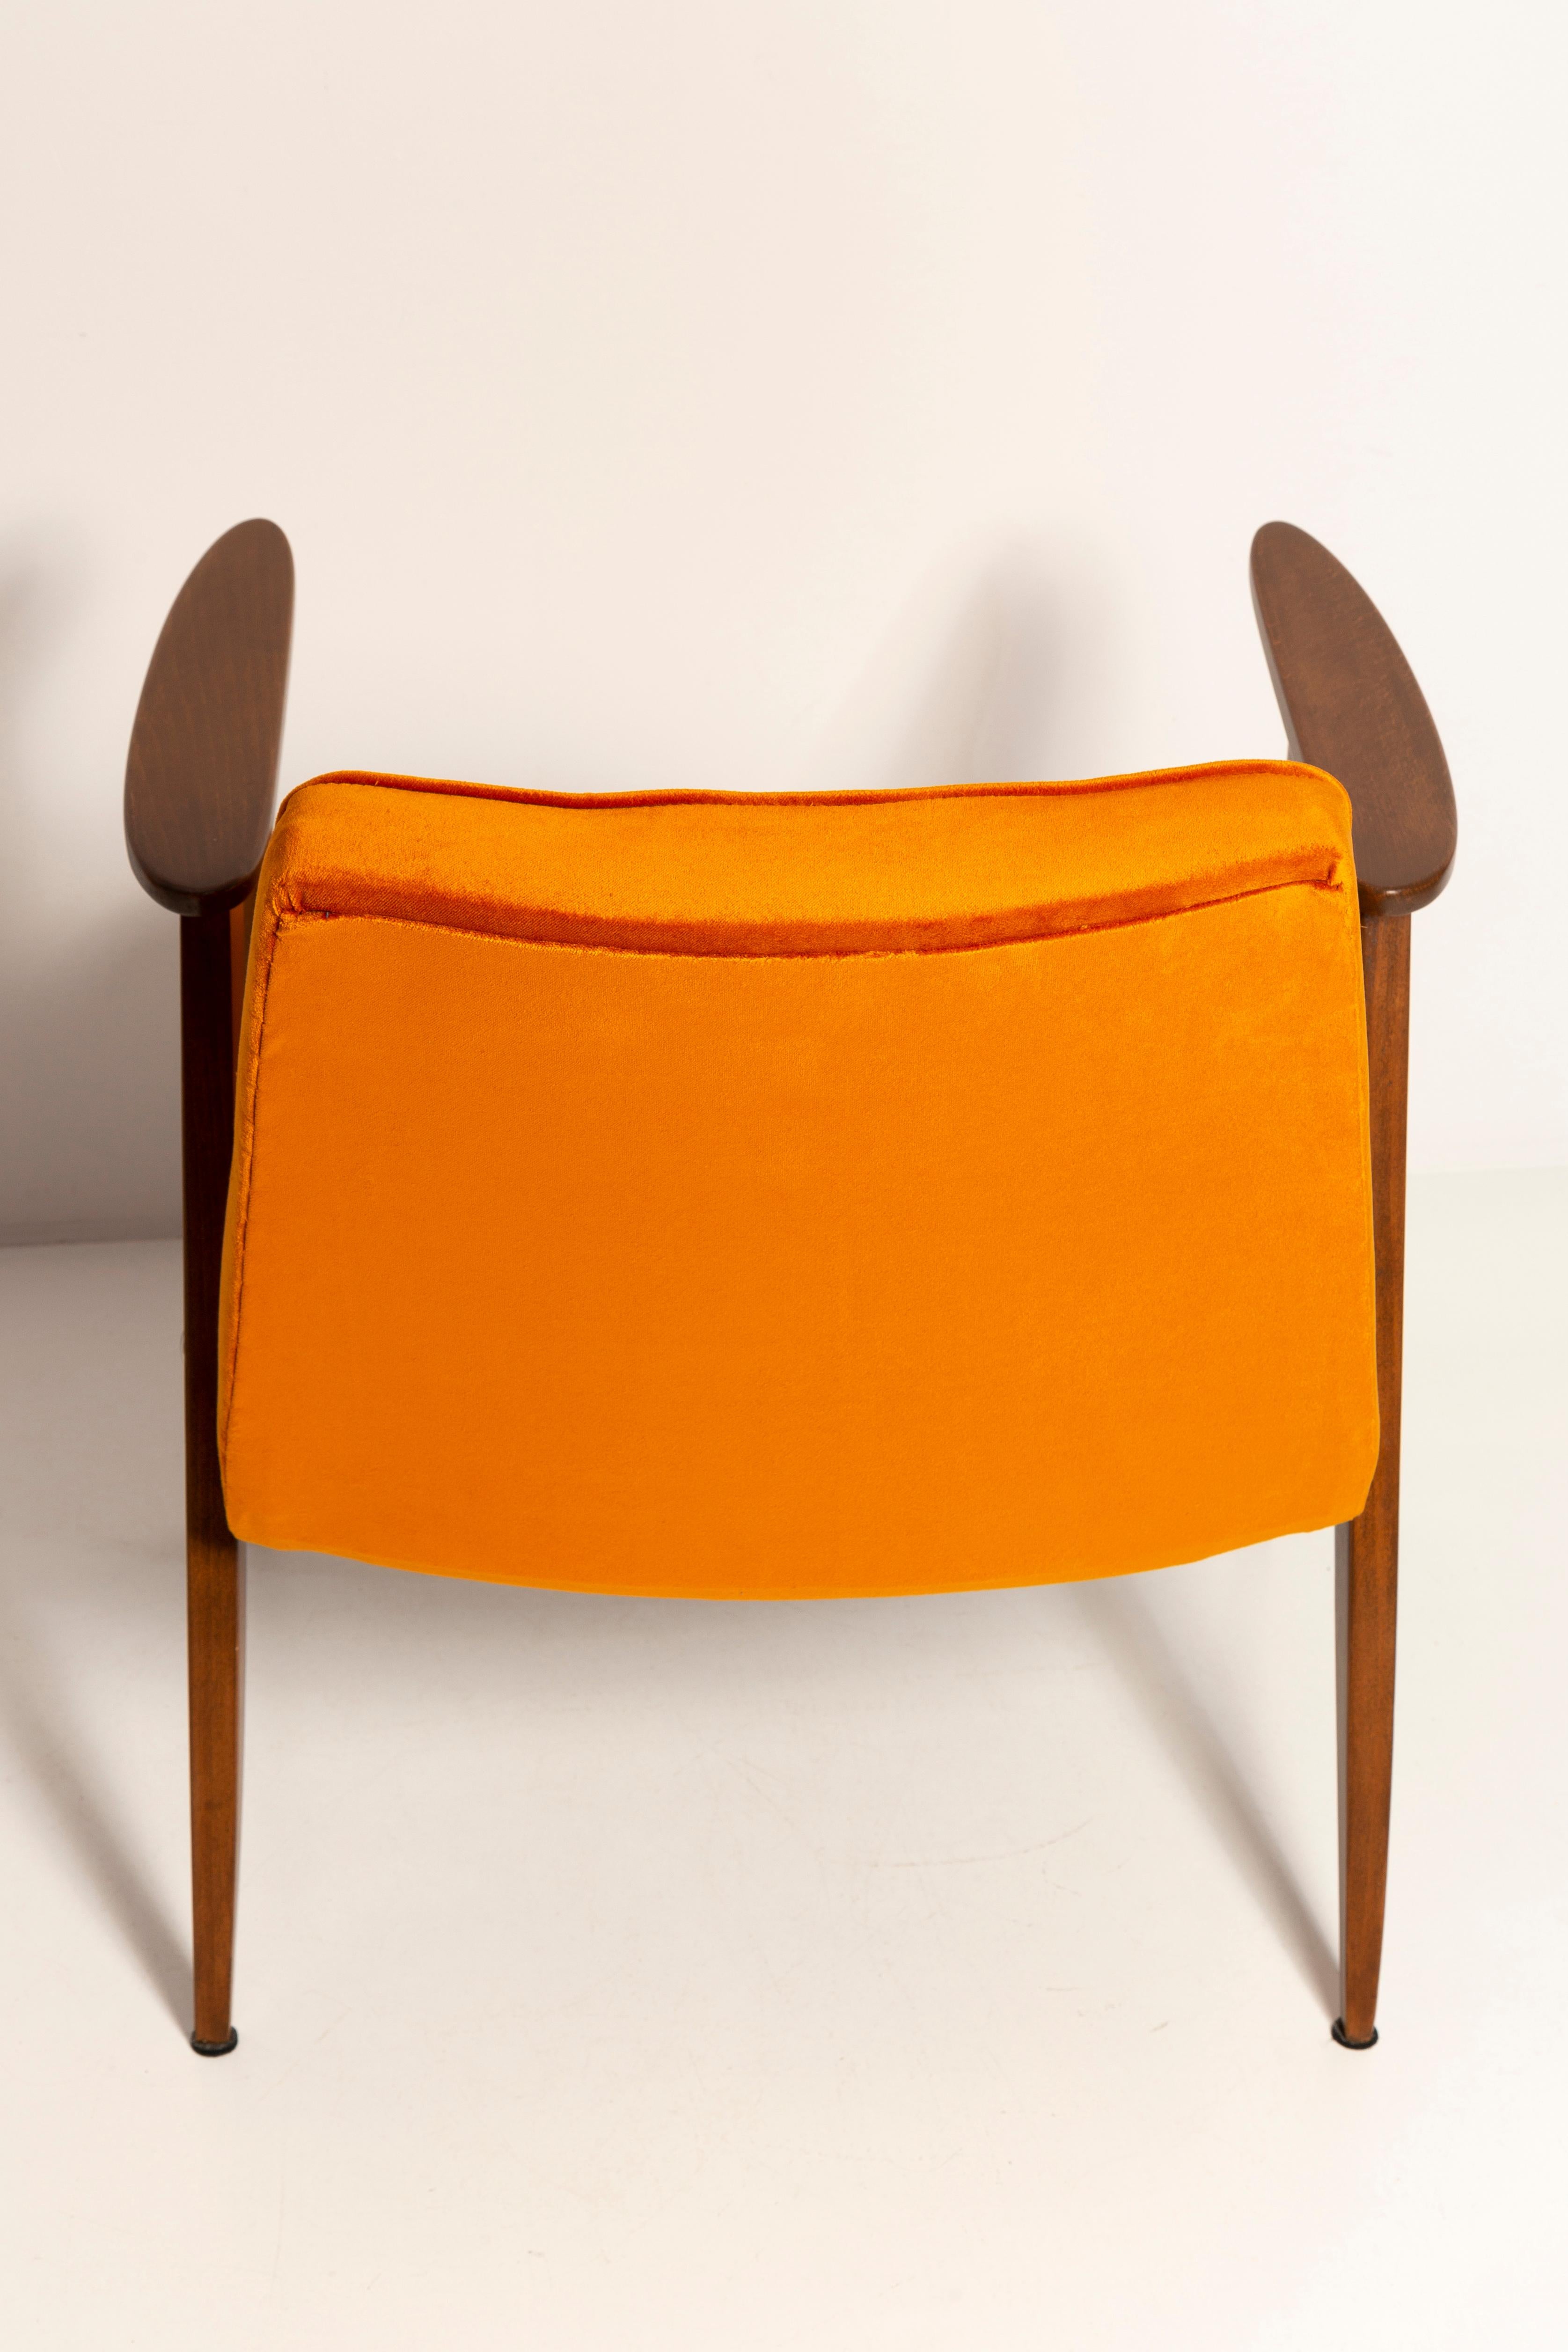 Pair of Mid-Century 366 Armchairs, Green and Orange, by Chierowski Europe, 1960s For Sale 8